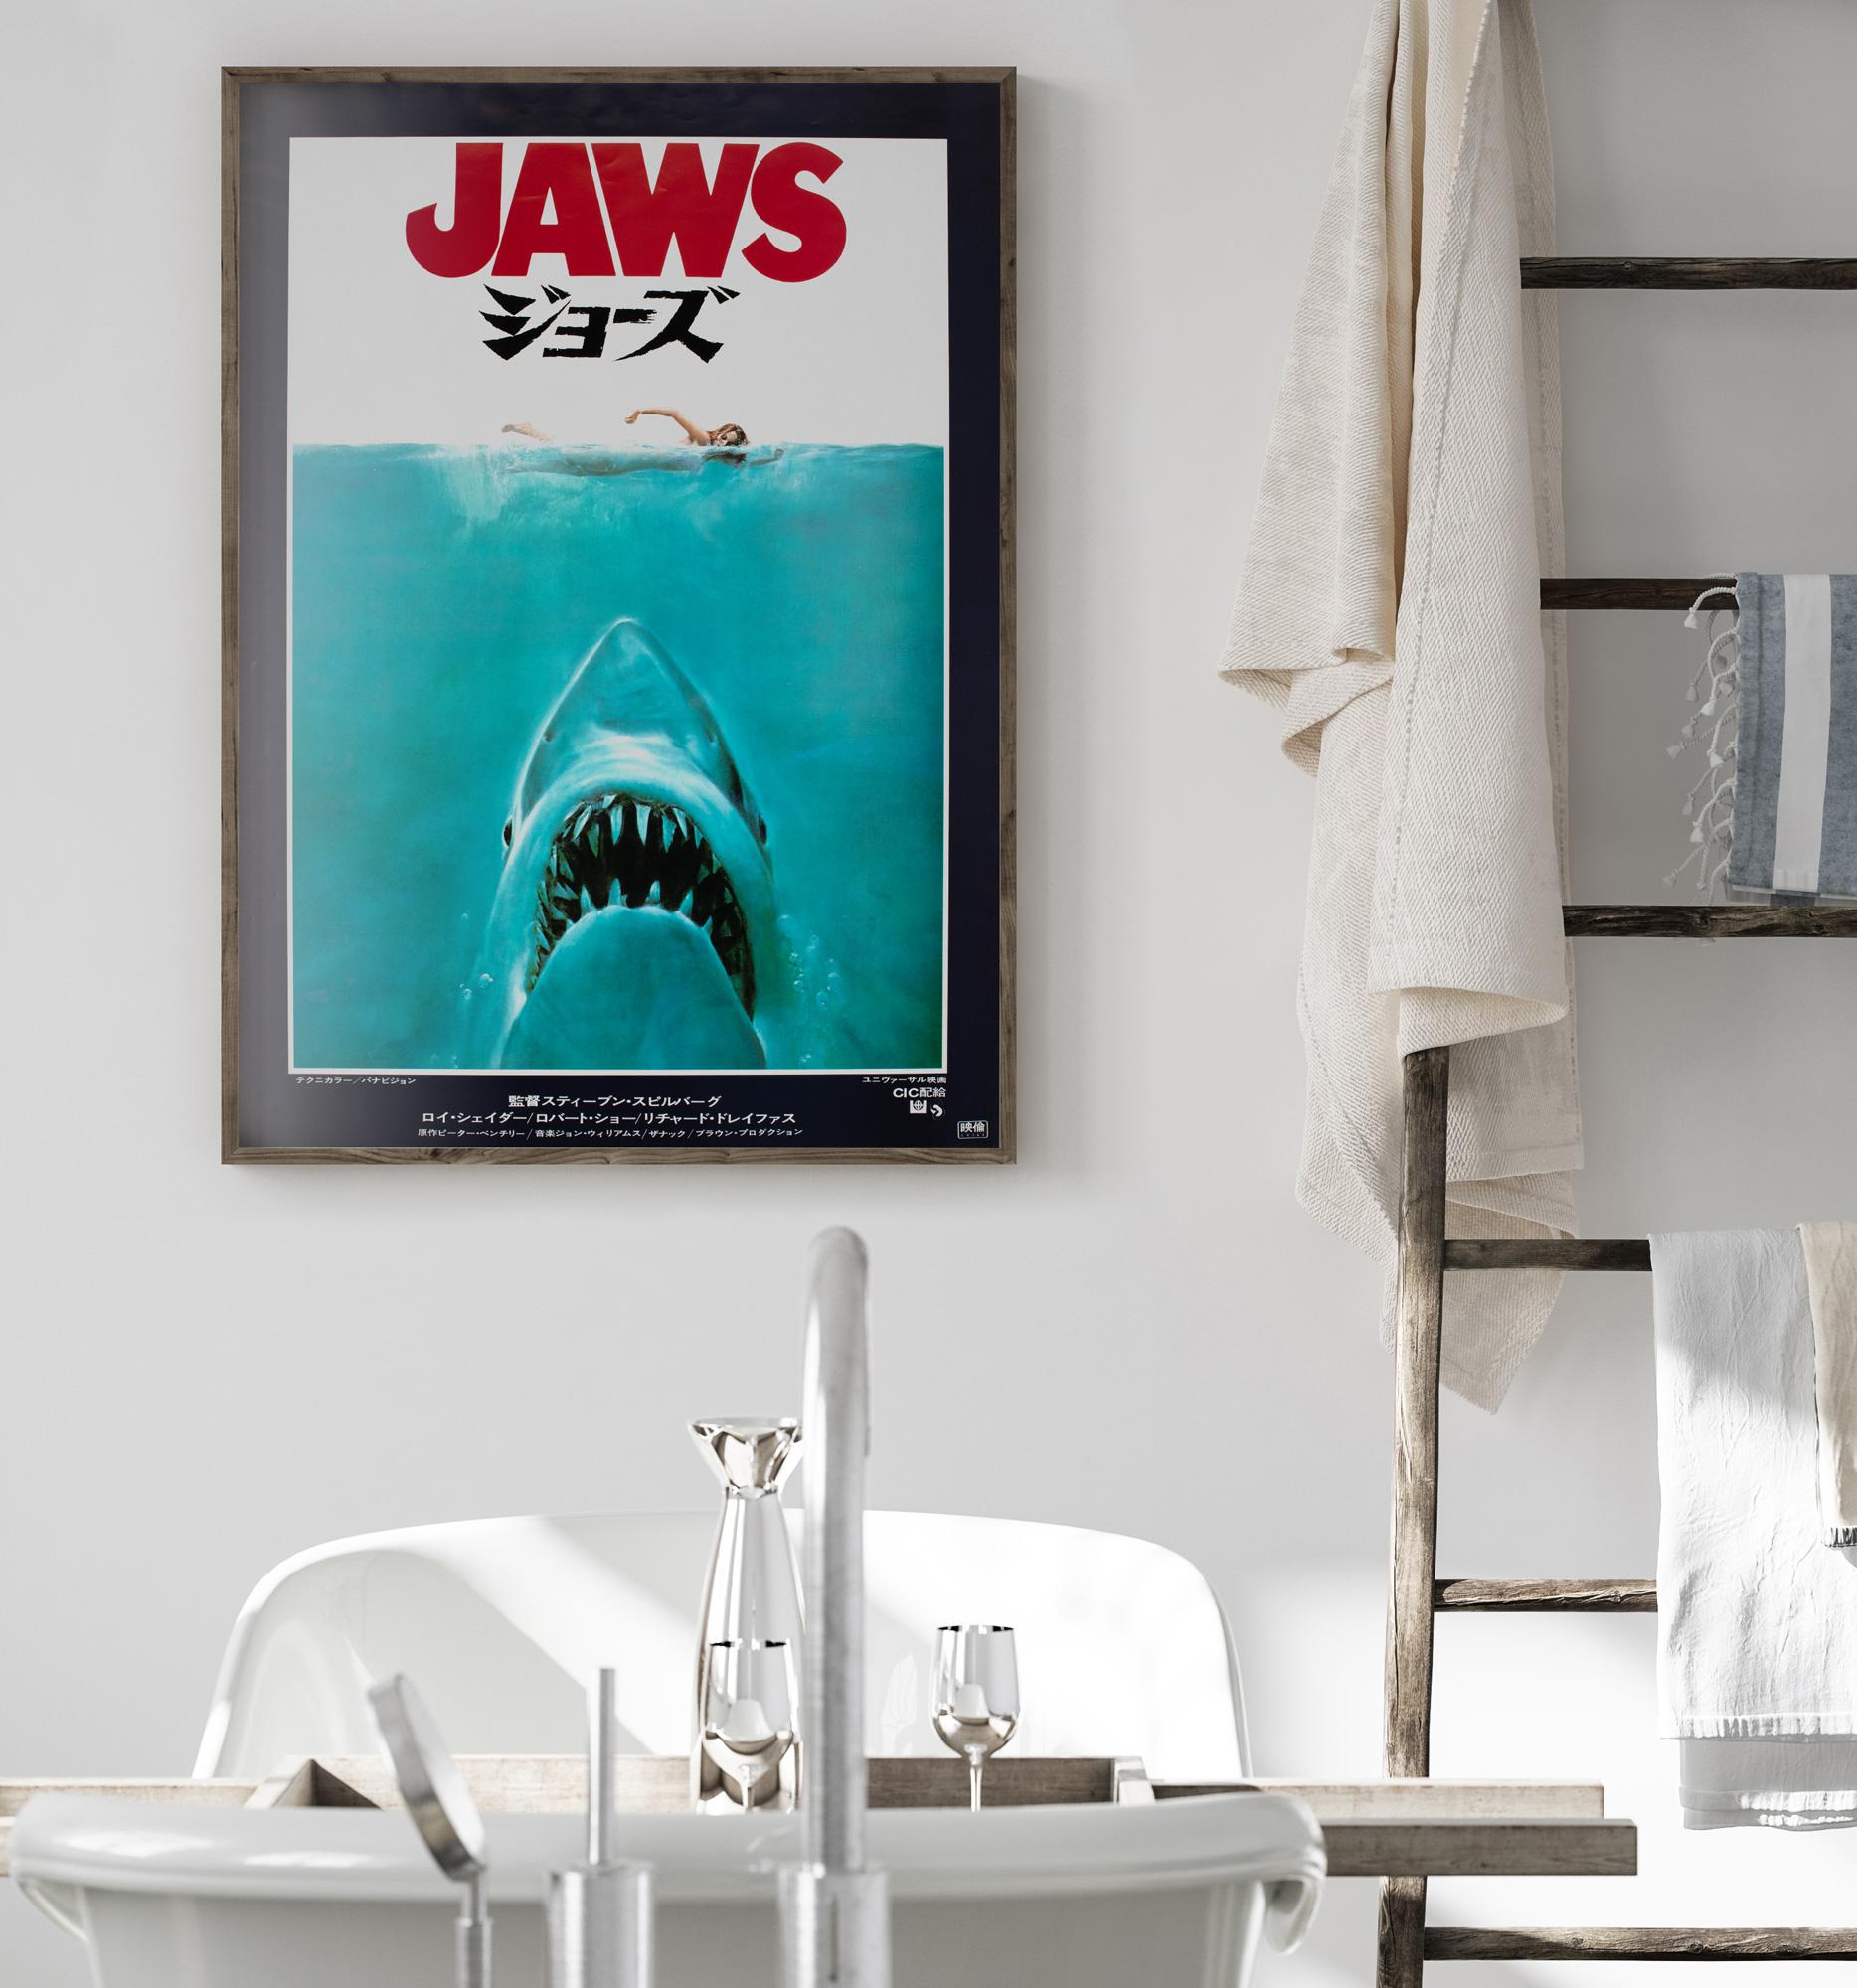 Kastel's iconic Jaws design looks particularly cool and clean on this original Japanese film poster. 

This original vintage movie poster is sized 20 1/4 x 28 5/8 inches. It will be sent rolled (unframed).